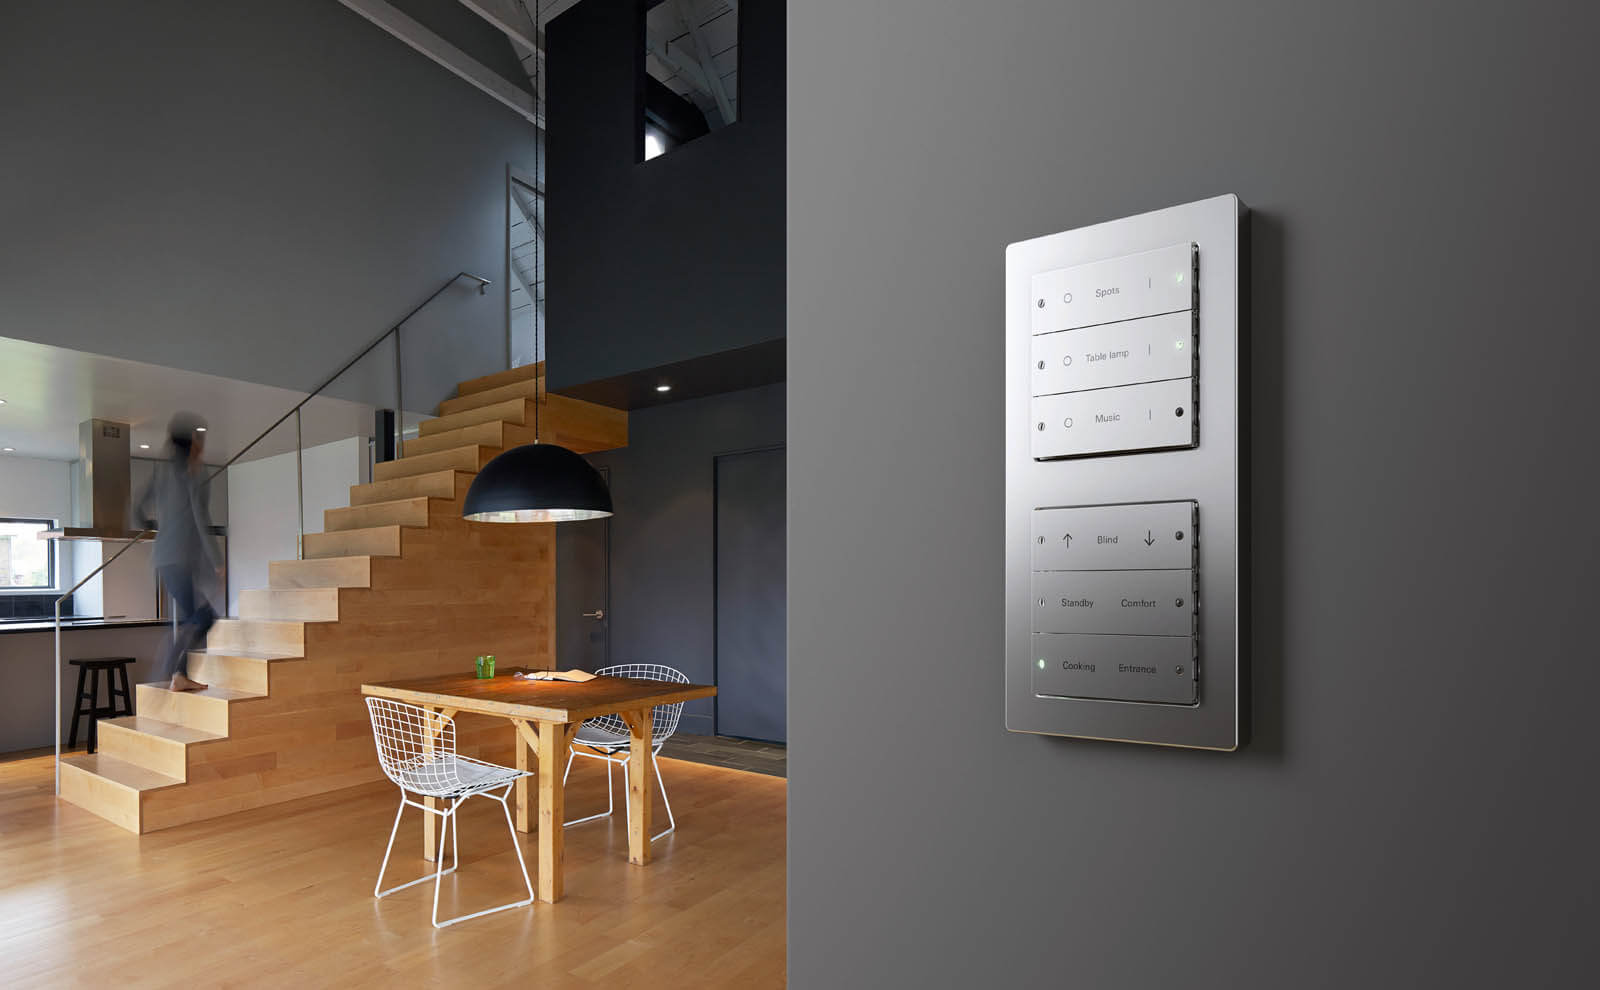 One button controls lighting, blinds, regulates room temperature and more